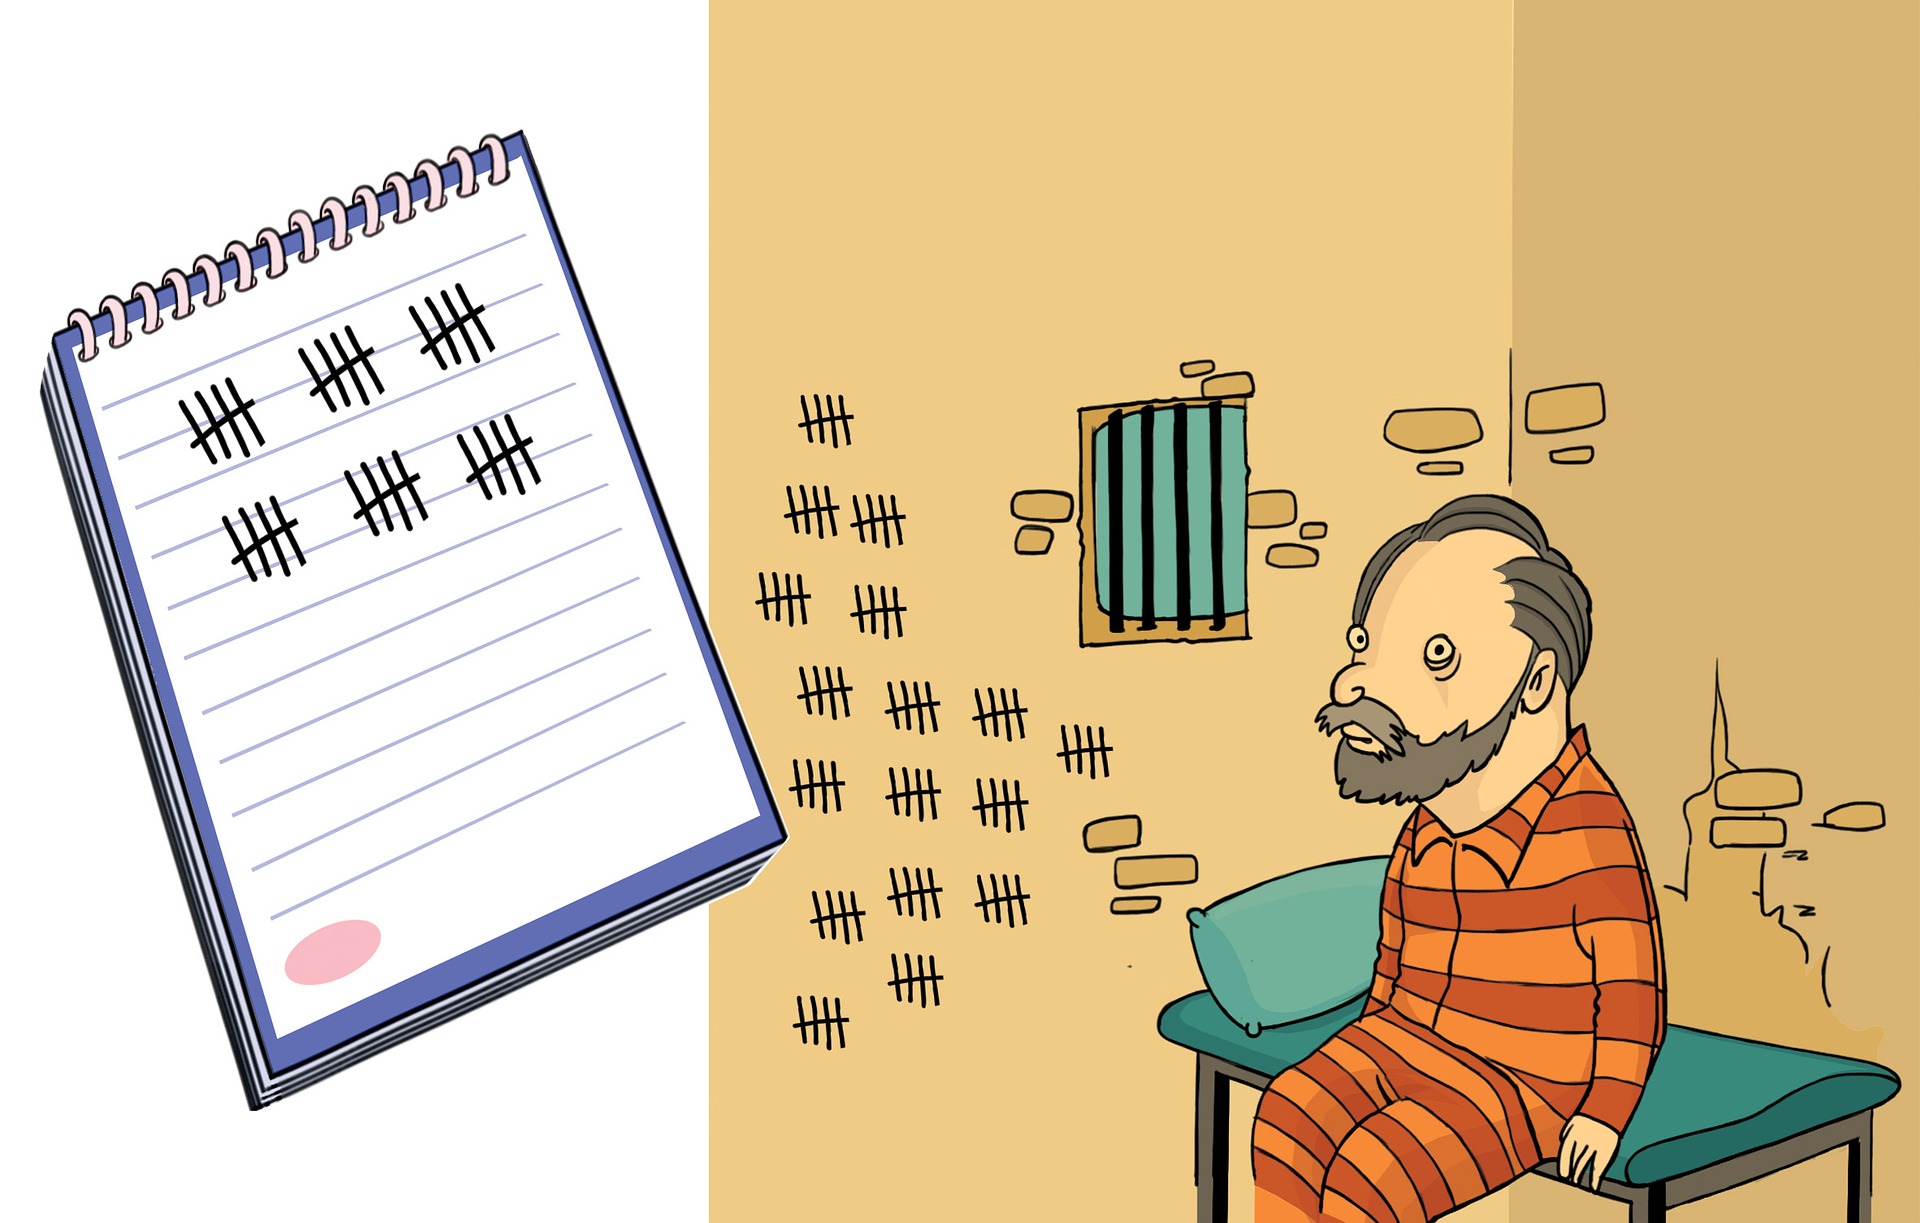 Inmate in a cell counting down the days until freedom